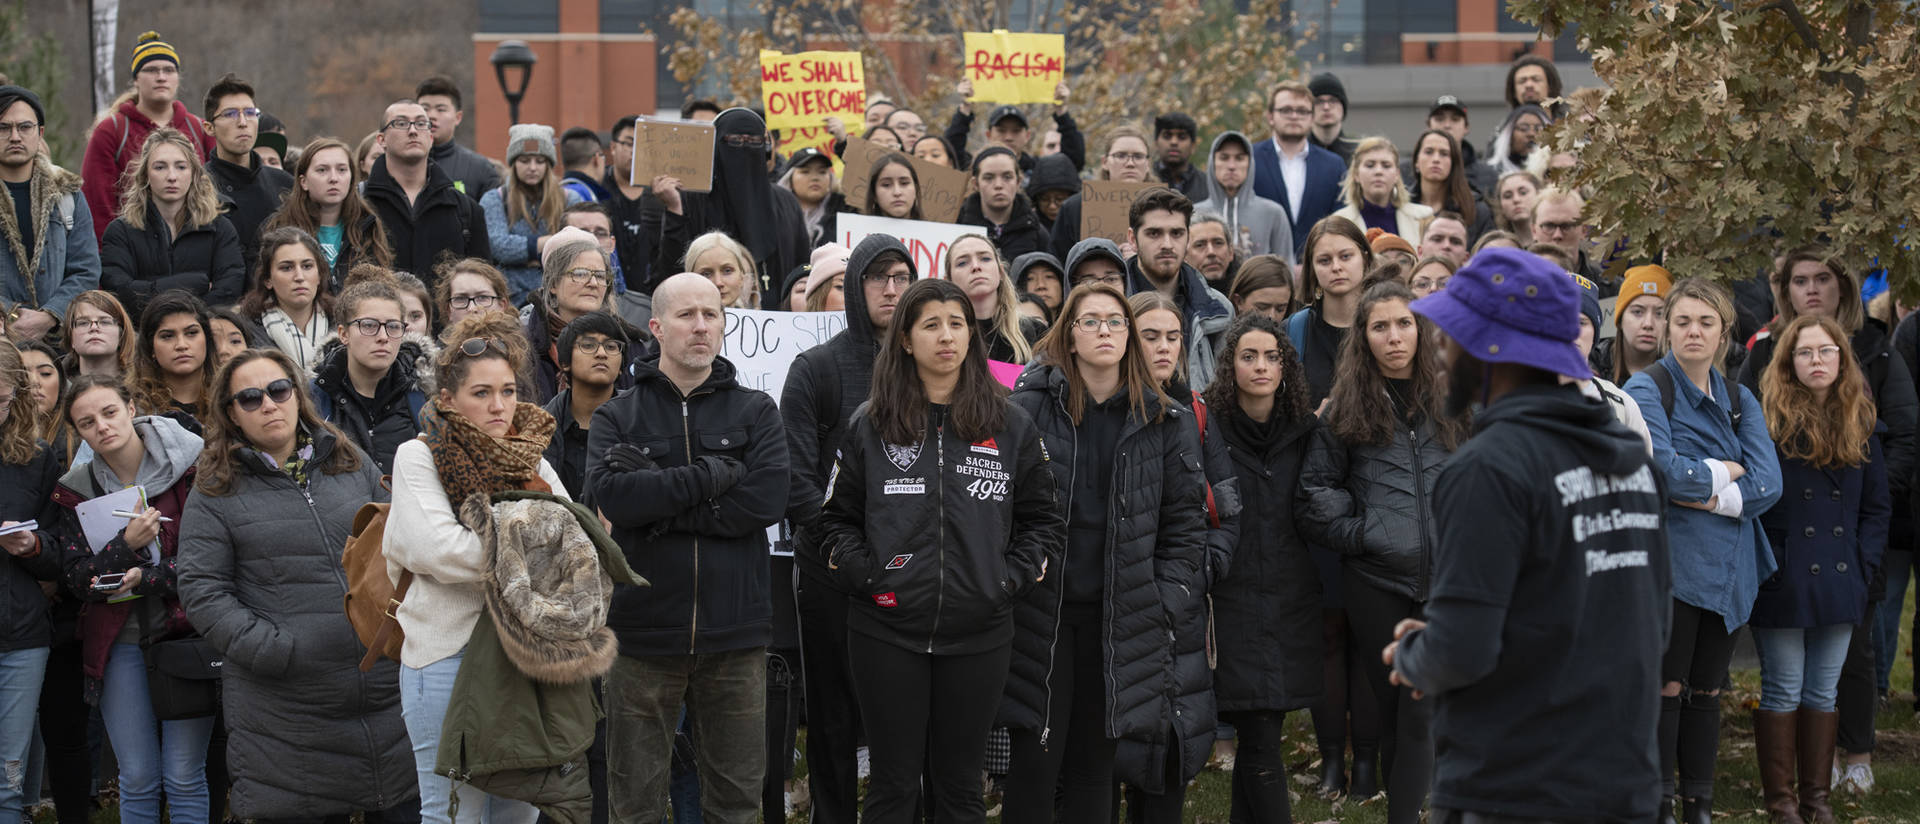 UW-Eau Claire students during walkout and protest, Nov. 25, 2019